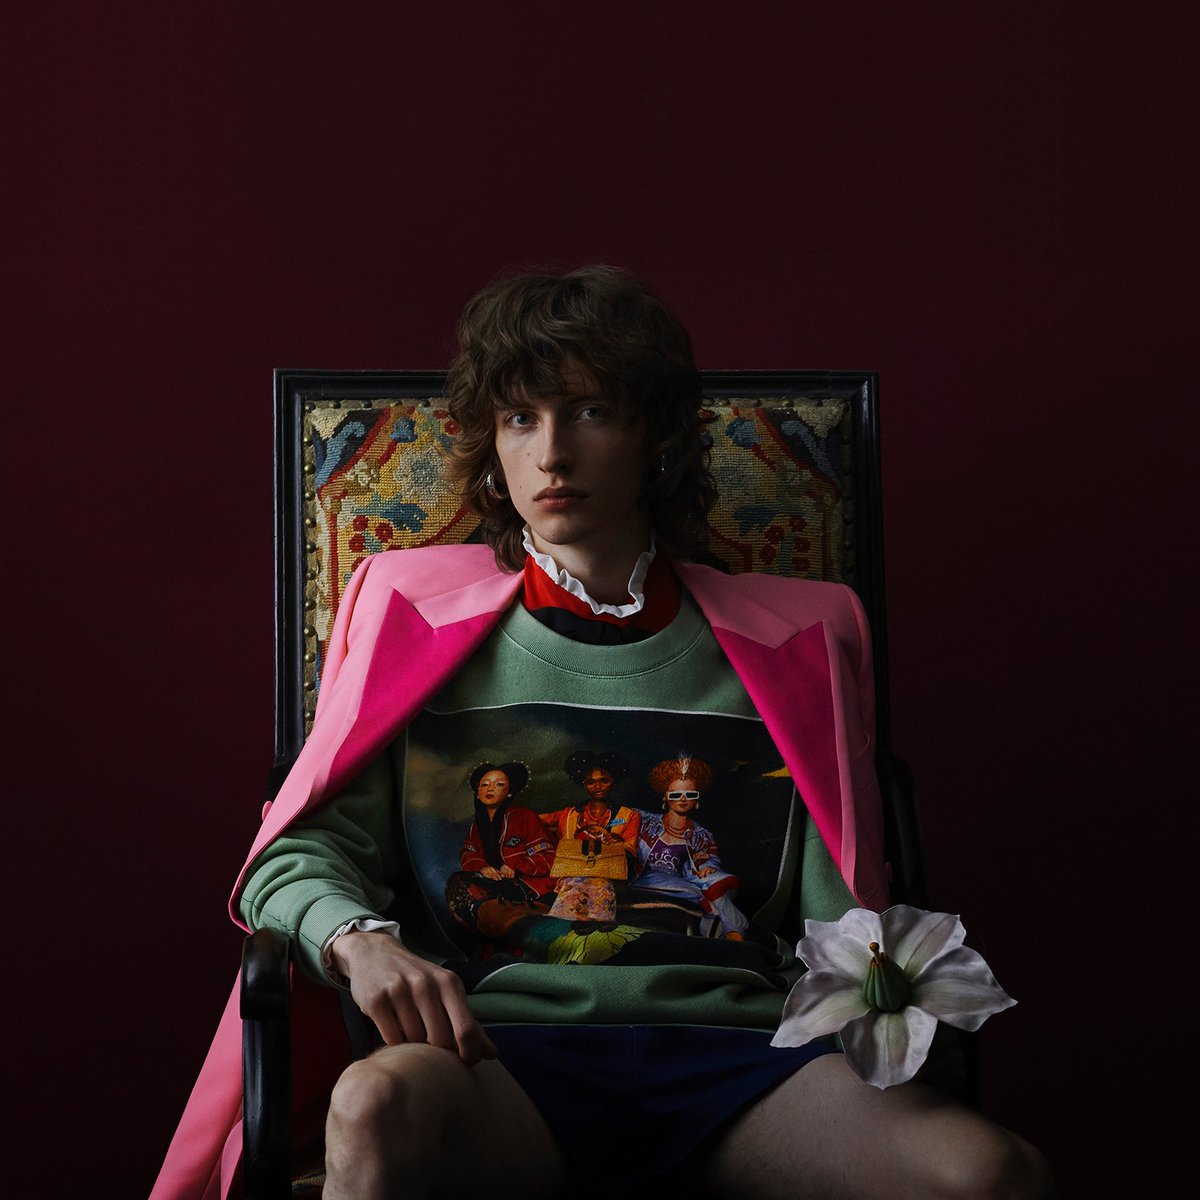 Photographer #JuliaHetta captures a series of portraits featuring characters wearing the limited edition #GucciHallucination line-up of ready-to-wear pieces. Only 200 of each T-shirt design and 100 of each sweatshirt style have been made, available only on.gucci.com/_GucciHallucin….